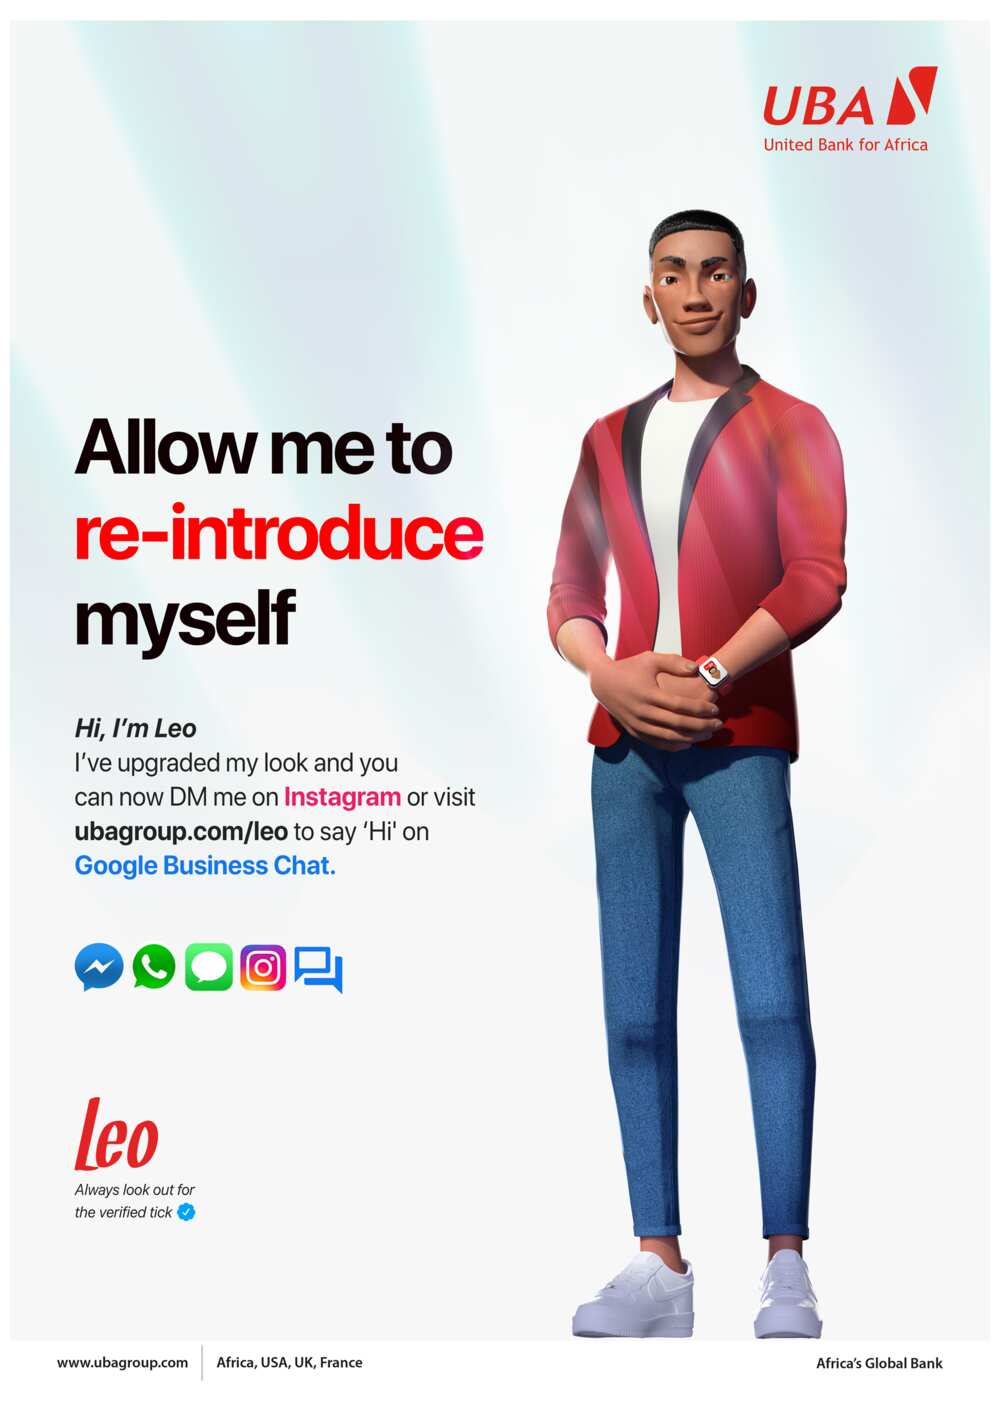 UBA Upgrades Chatbot Features, as Leo Launches Service on Instagram, Google Business Chat